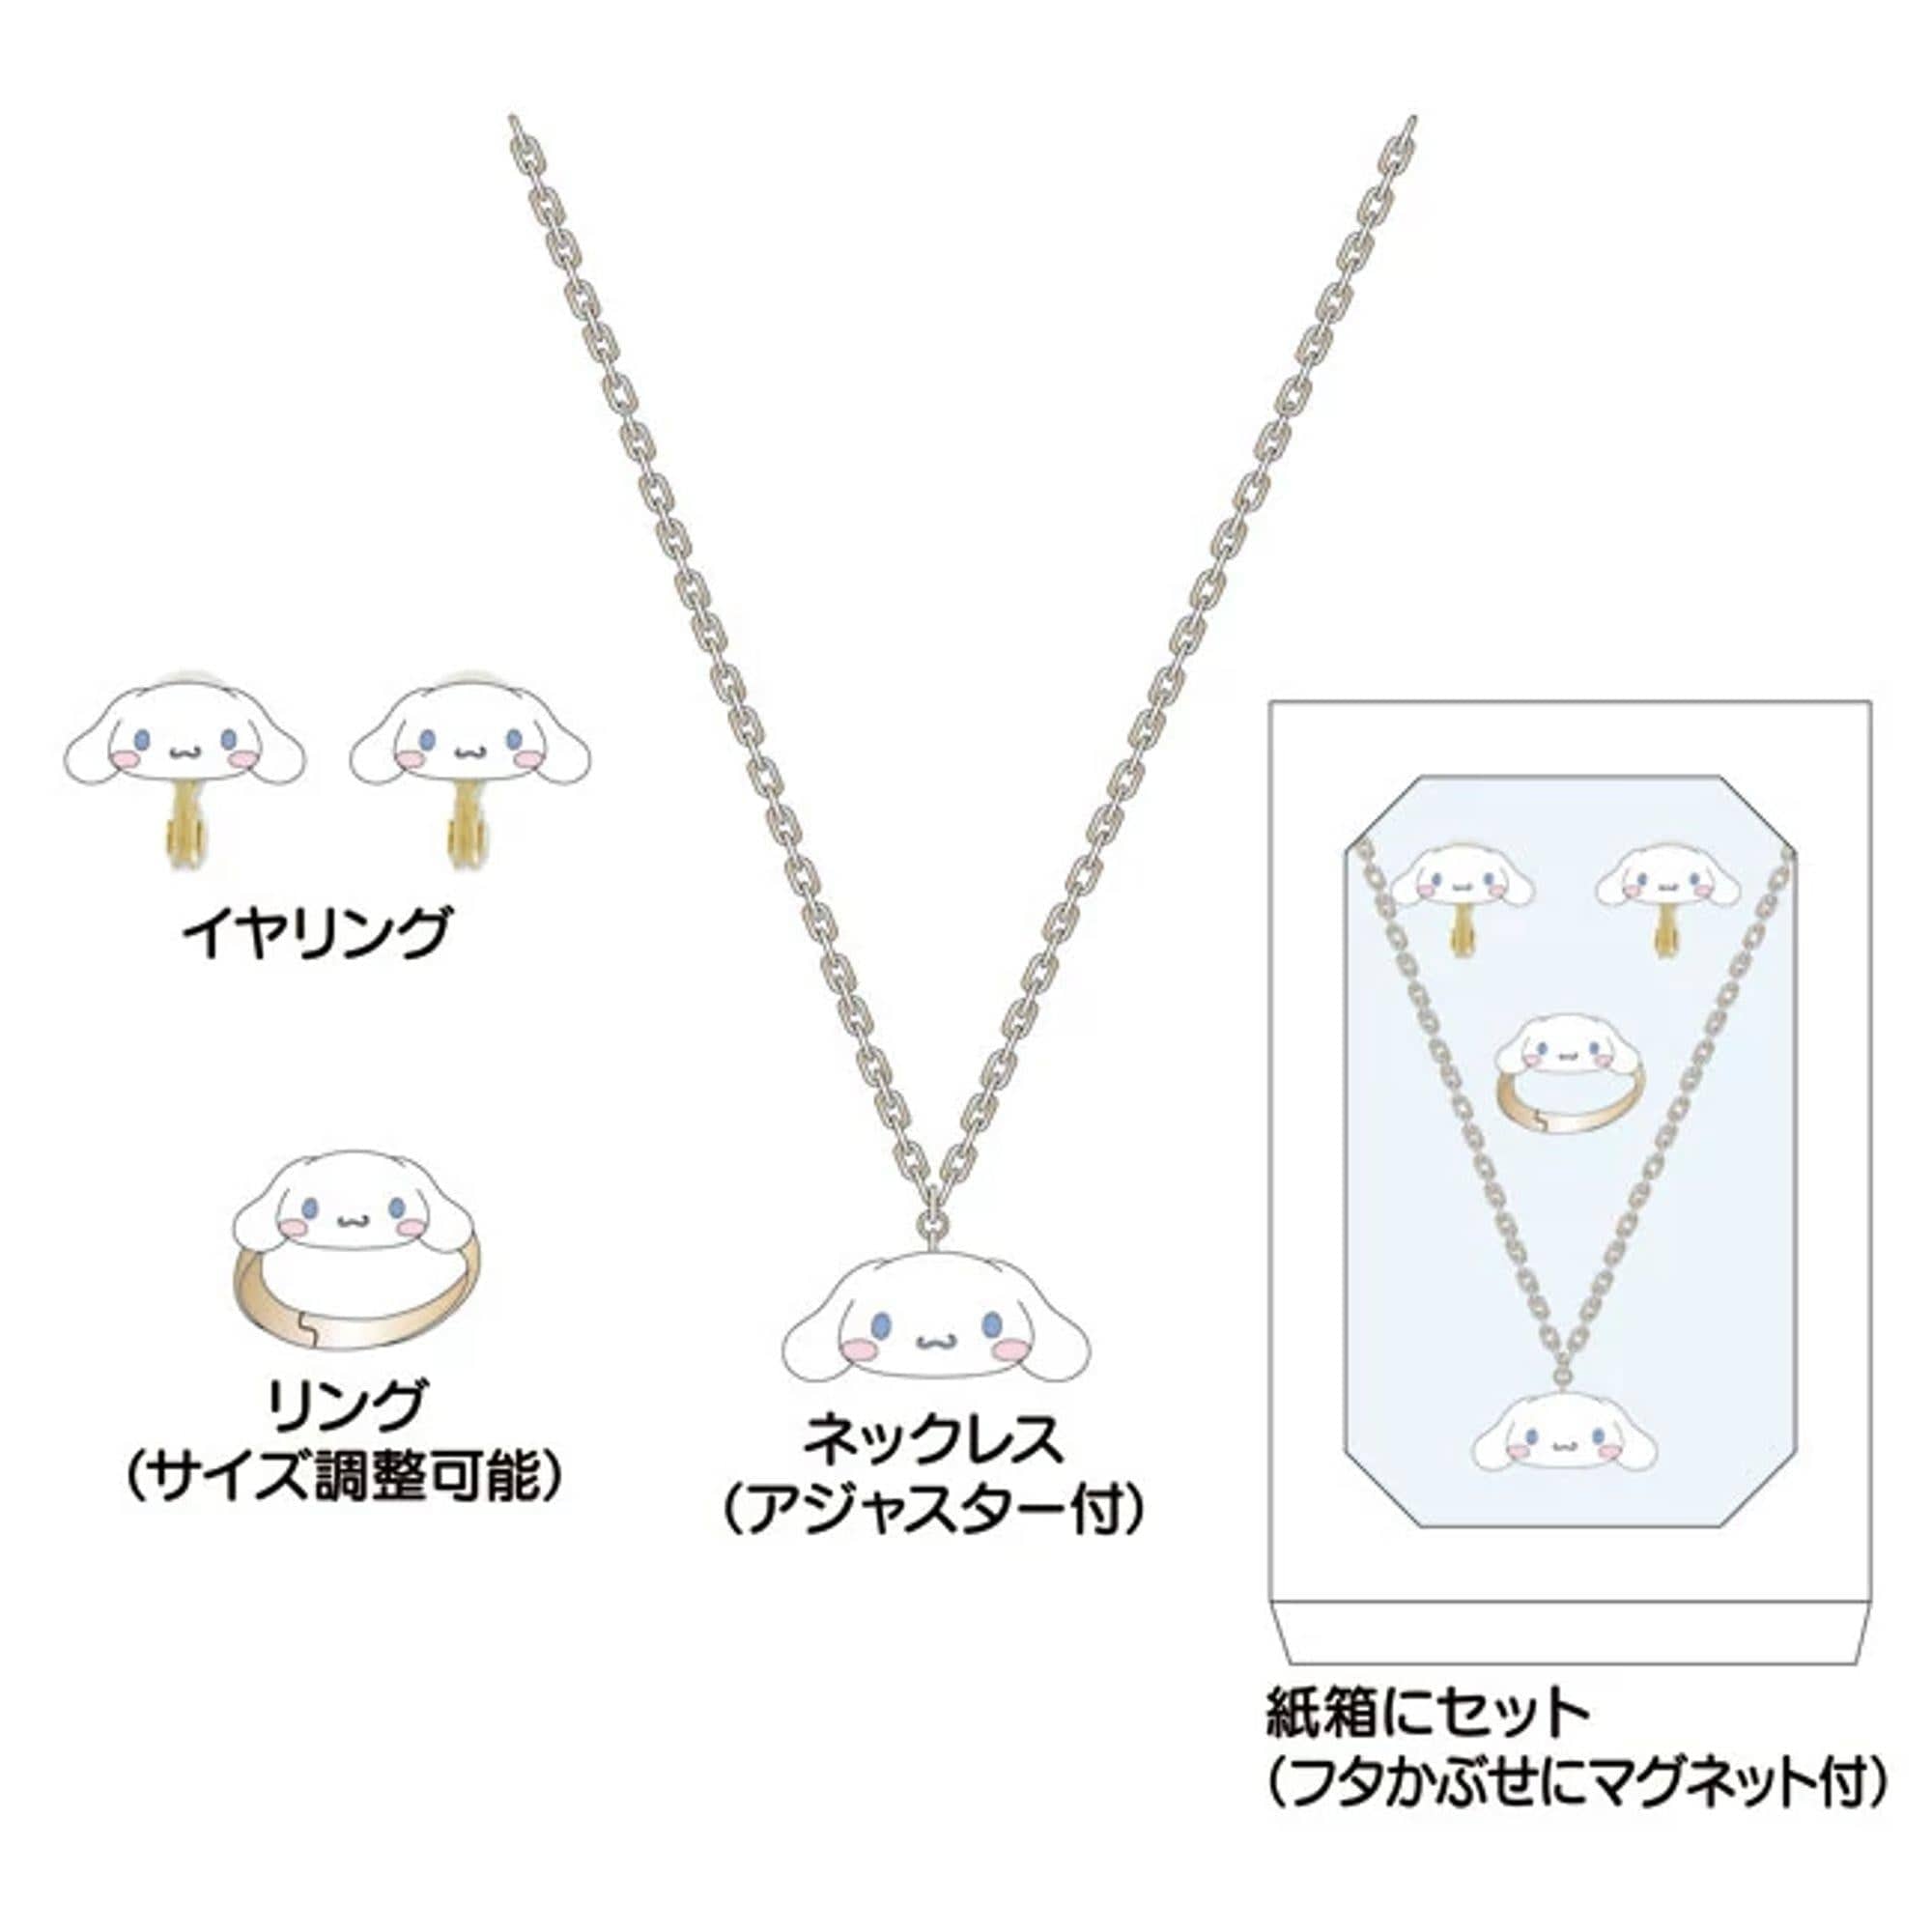 Hot Topic Cinnamoroll Sweets Best Friend Necklace Set